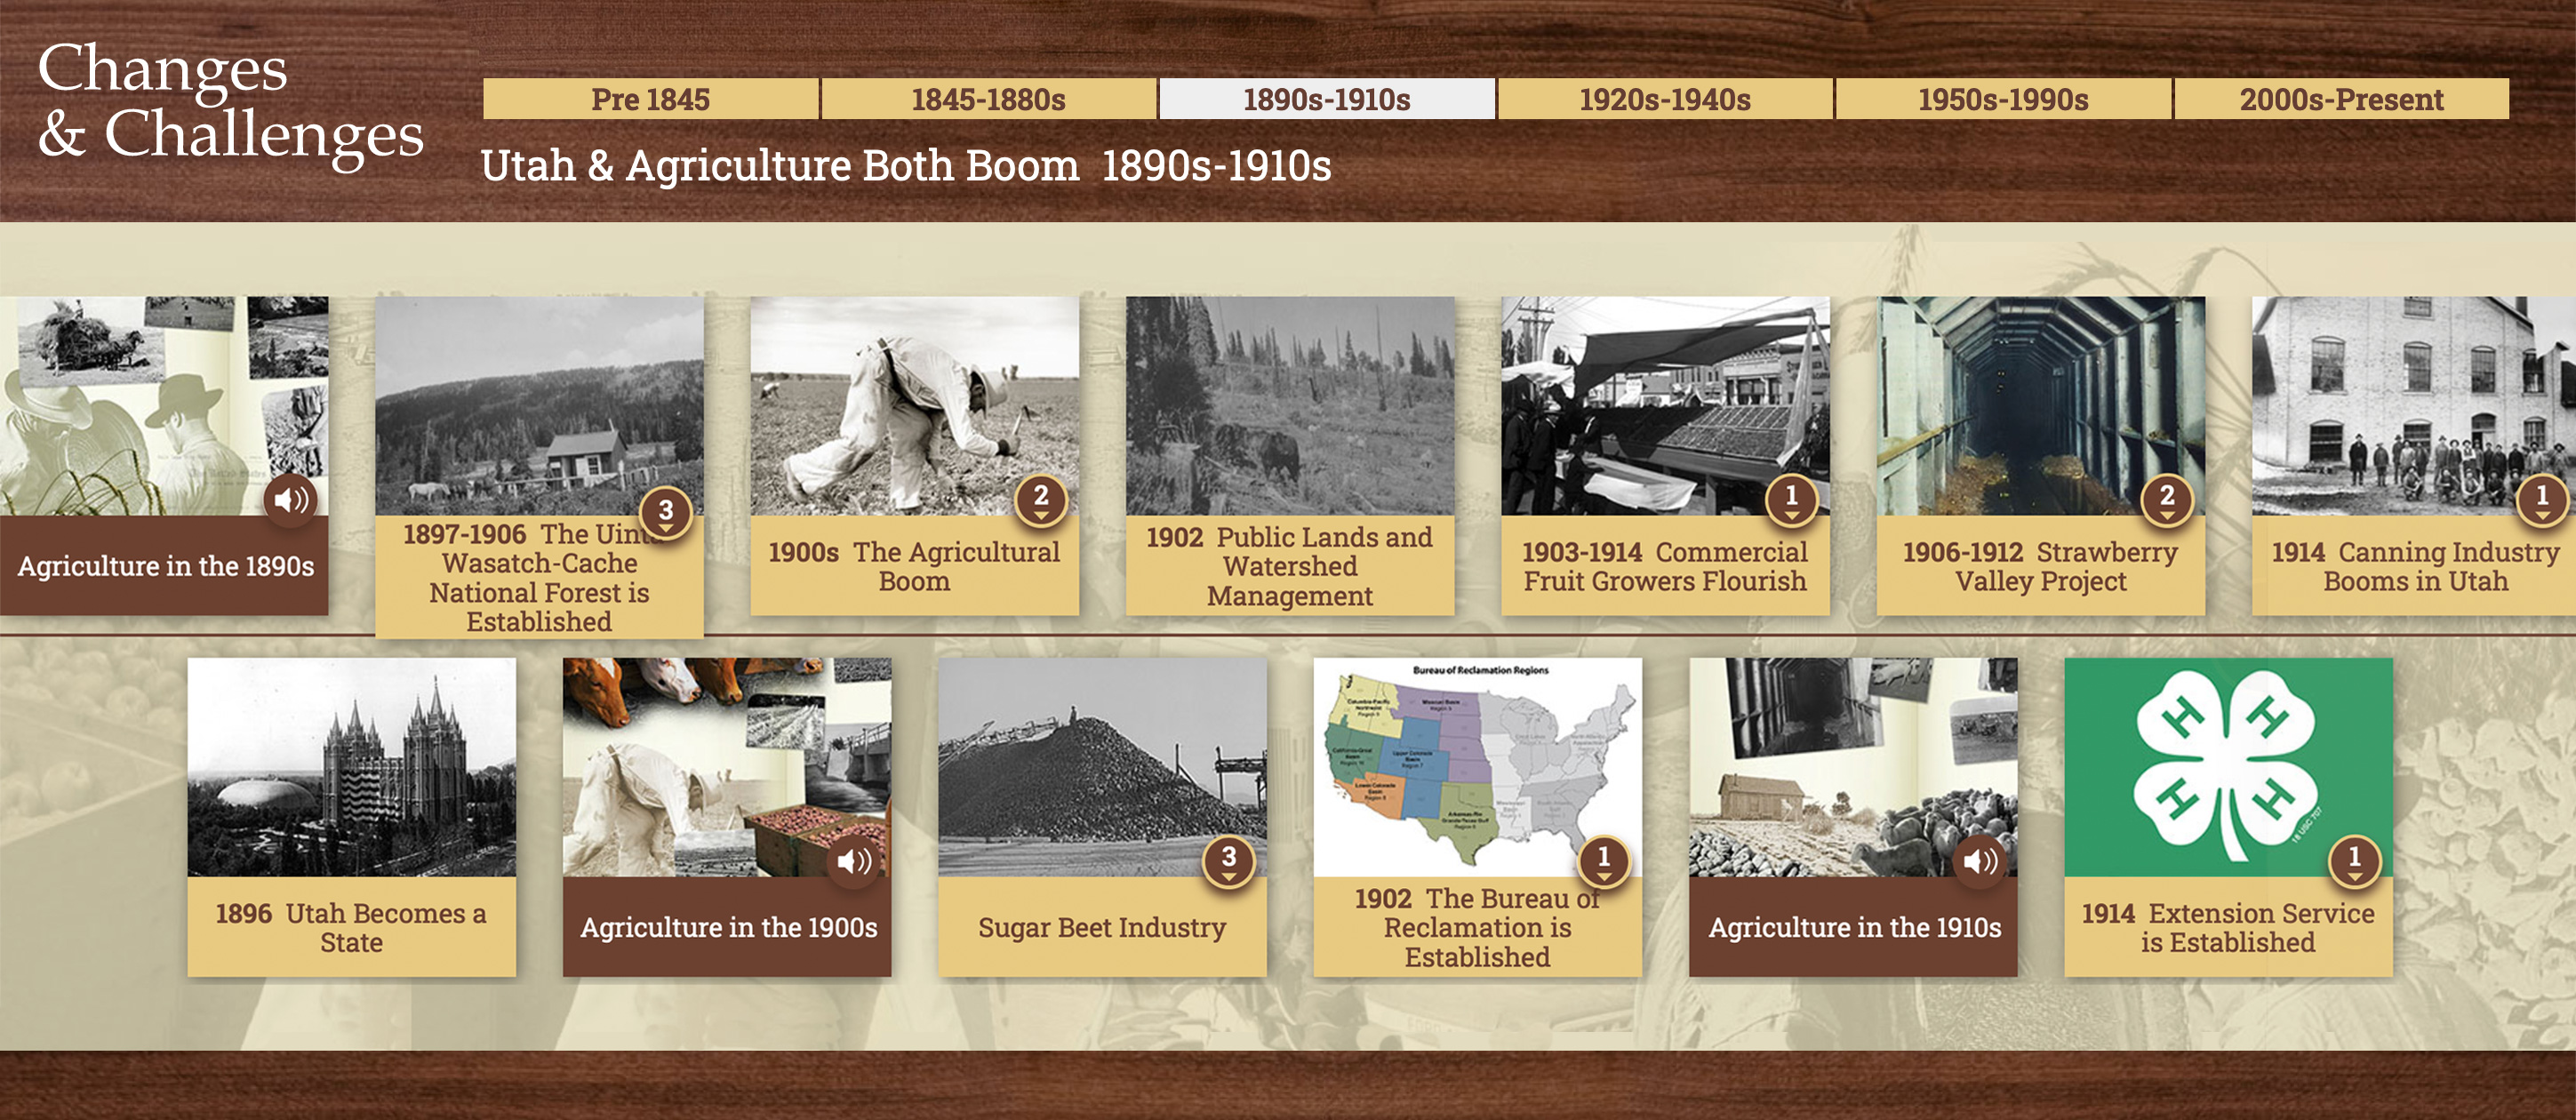 1890s: Utah Becomes a State